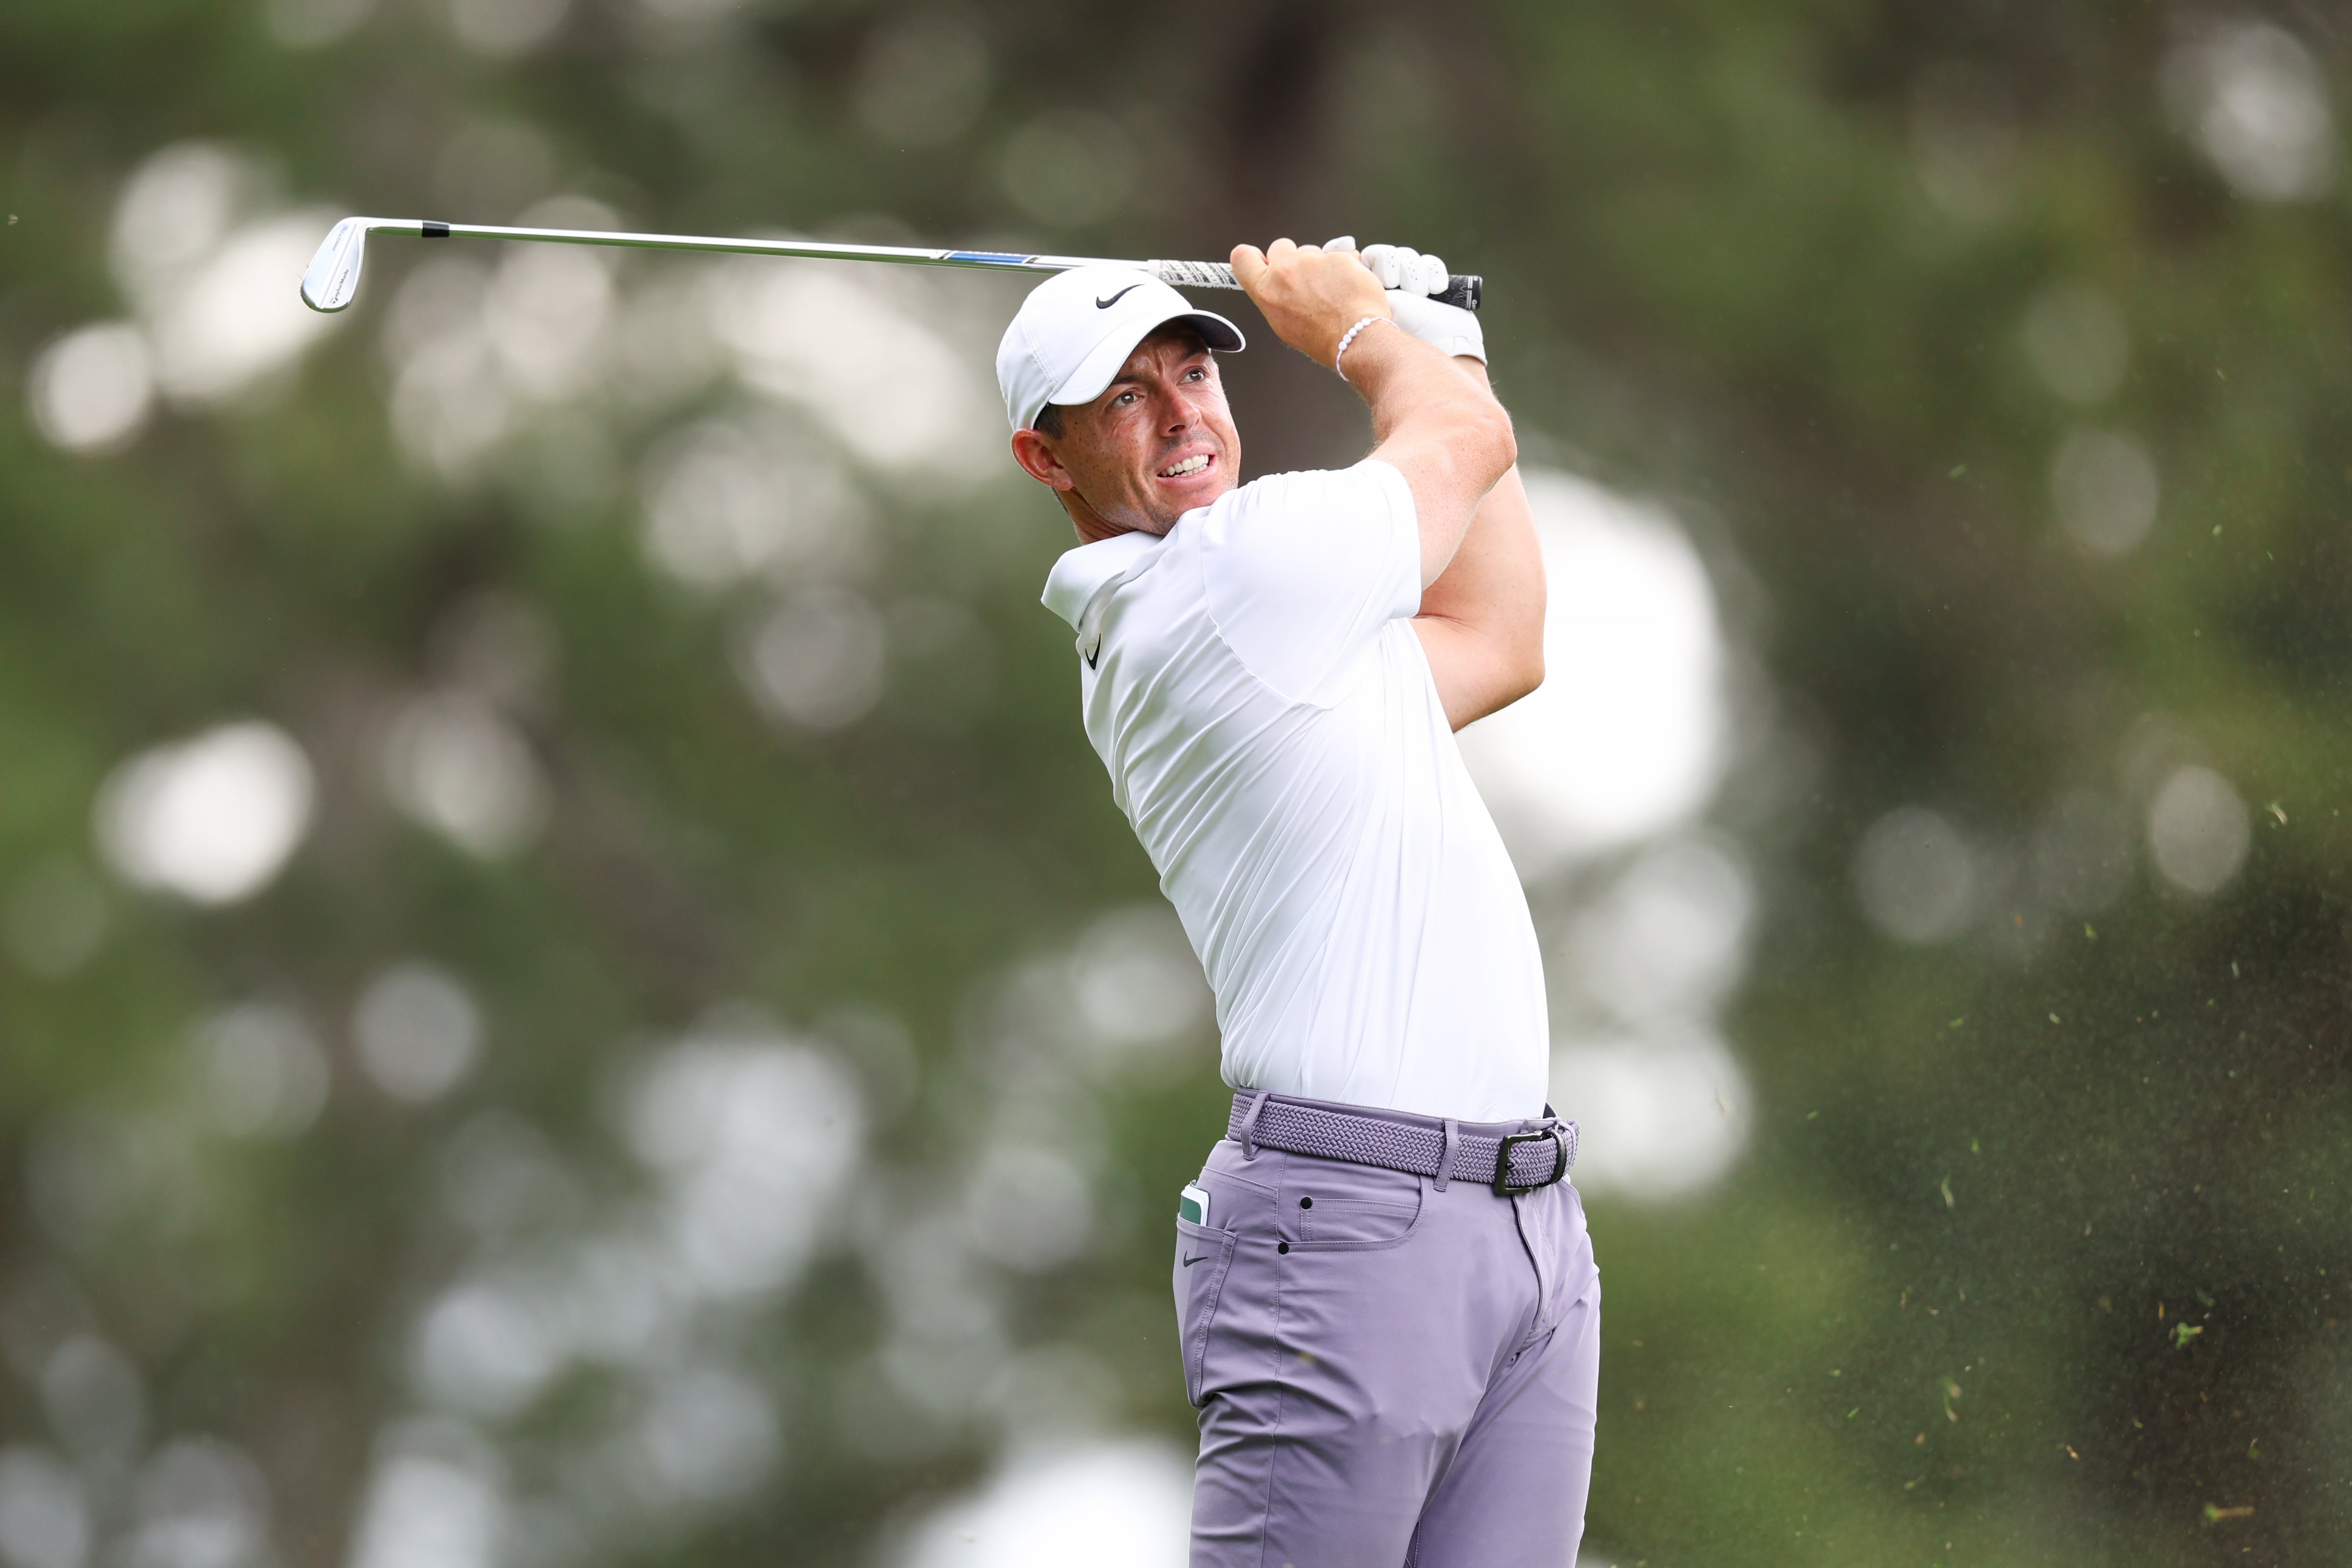 Rory McIlroy endured a mixed day